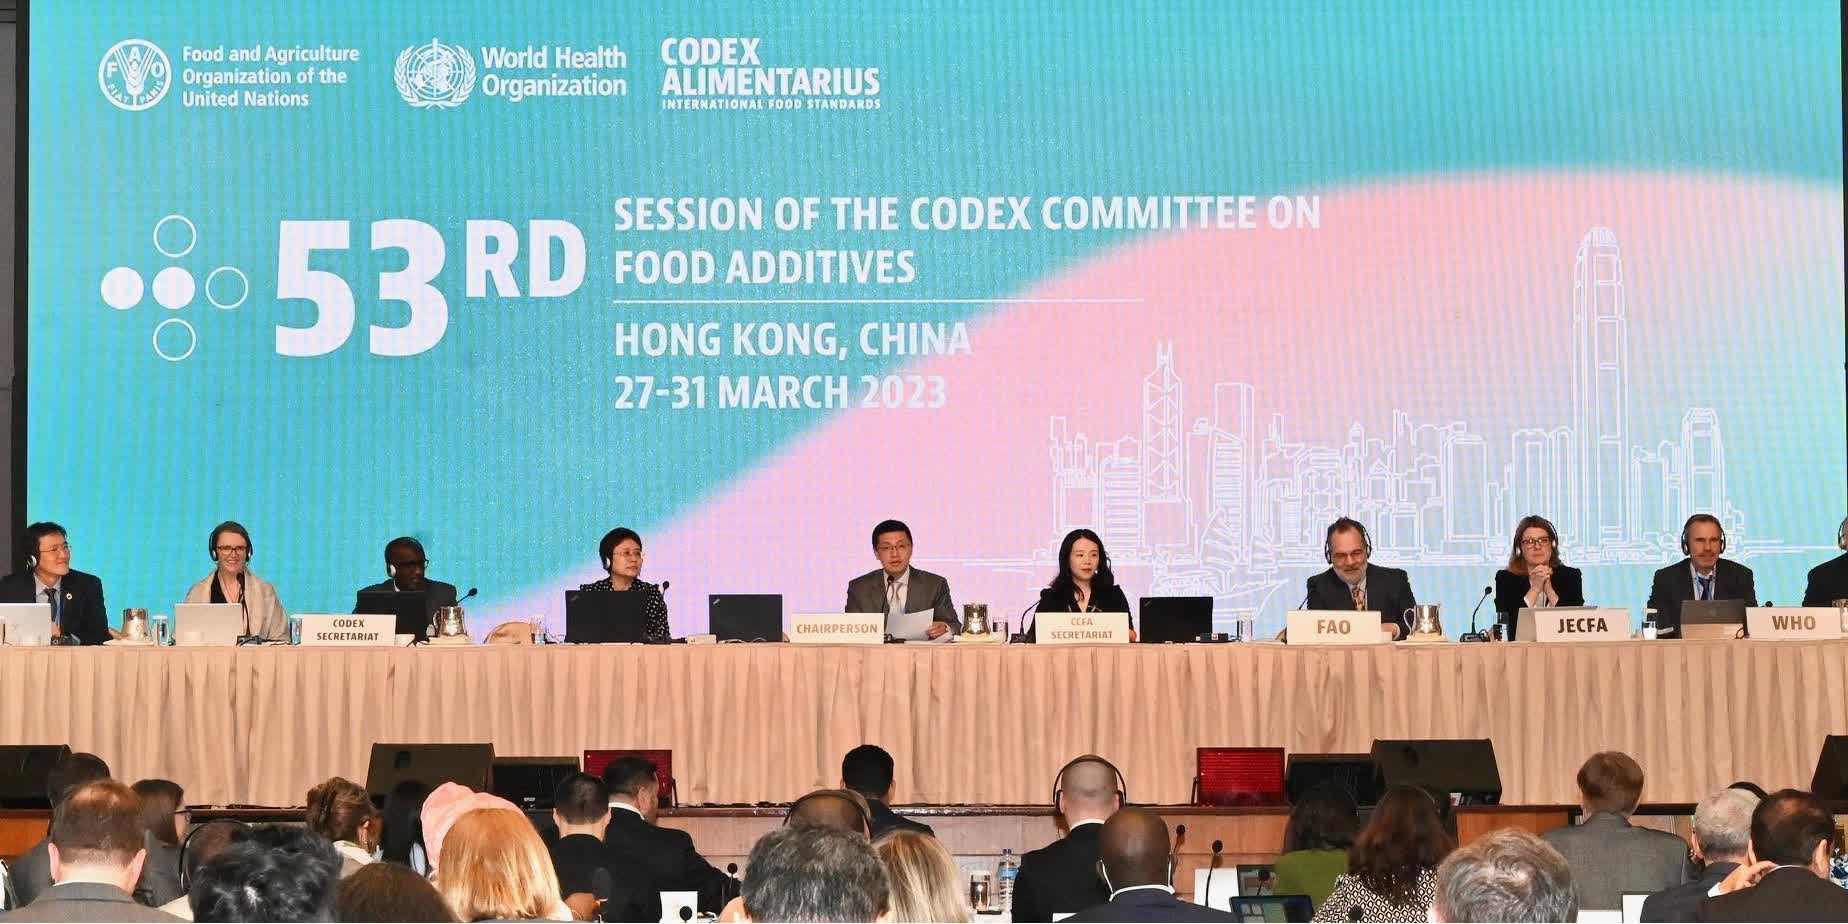 53rd Session of the Codex Committee on Food Additives opens in Hong Kong